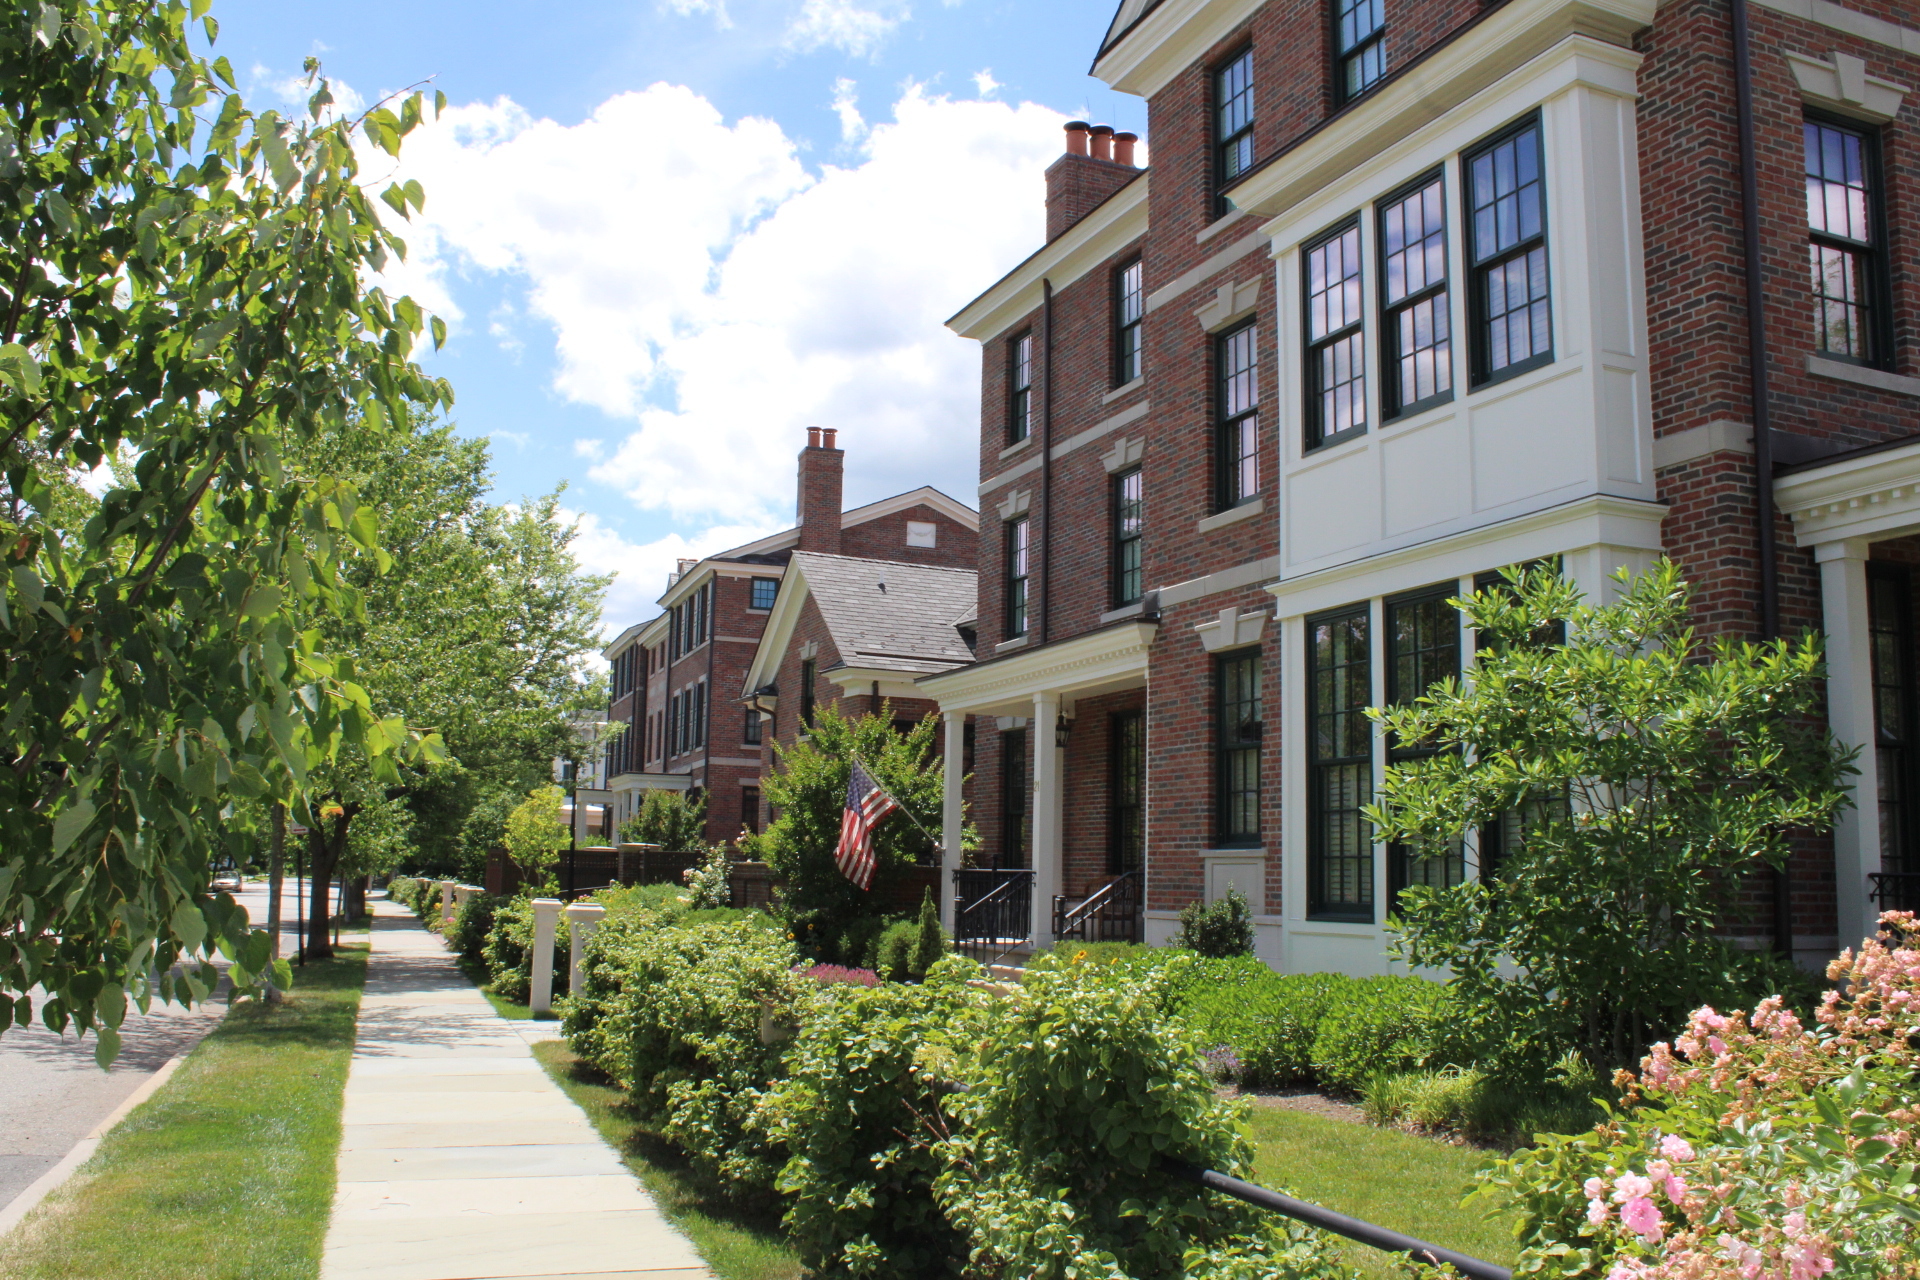 A line of residential homes in daylight in Morristown, New Jersey.